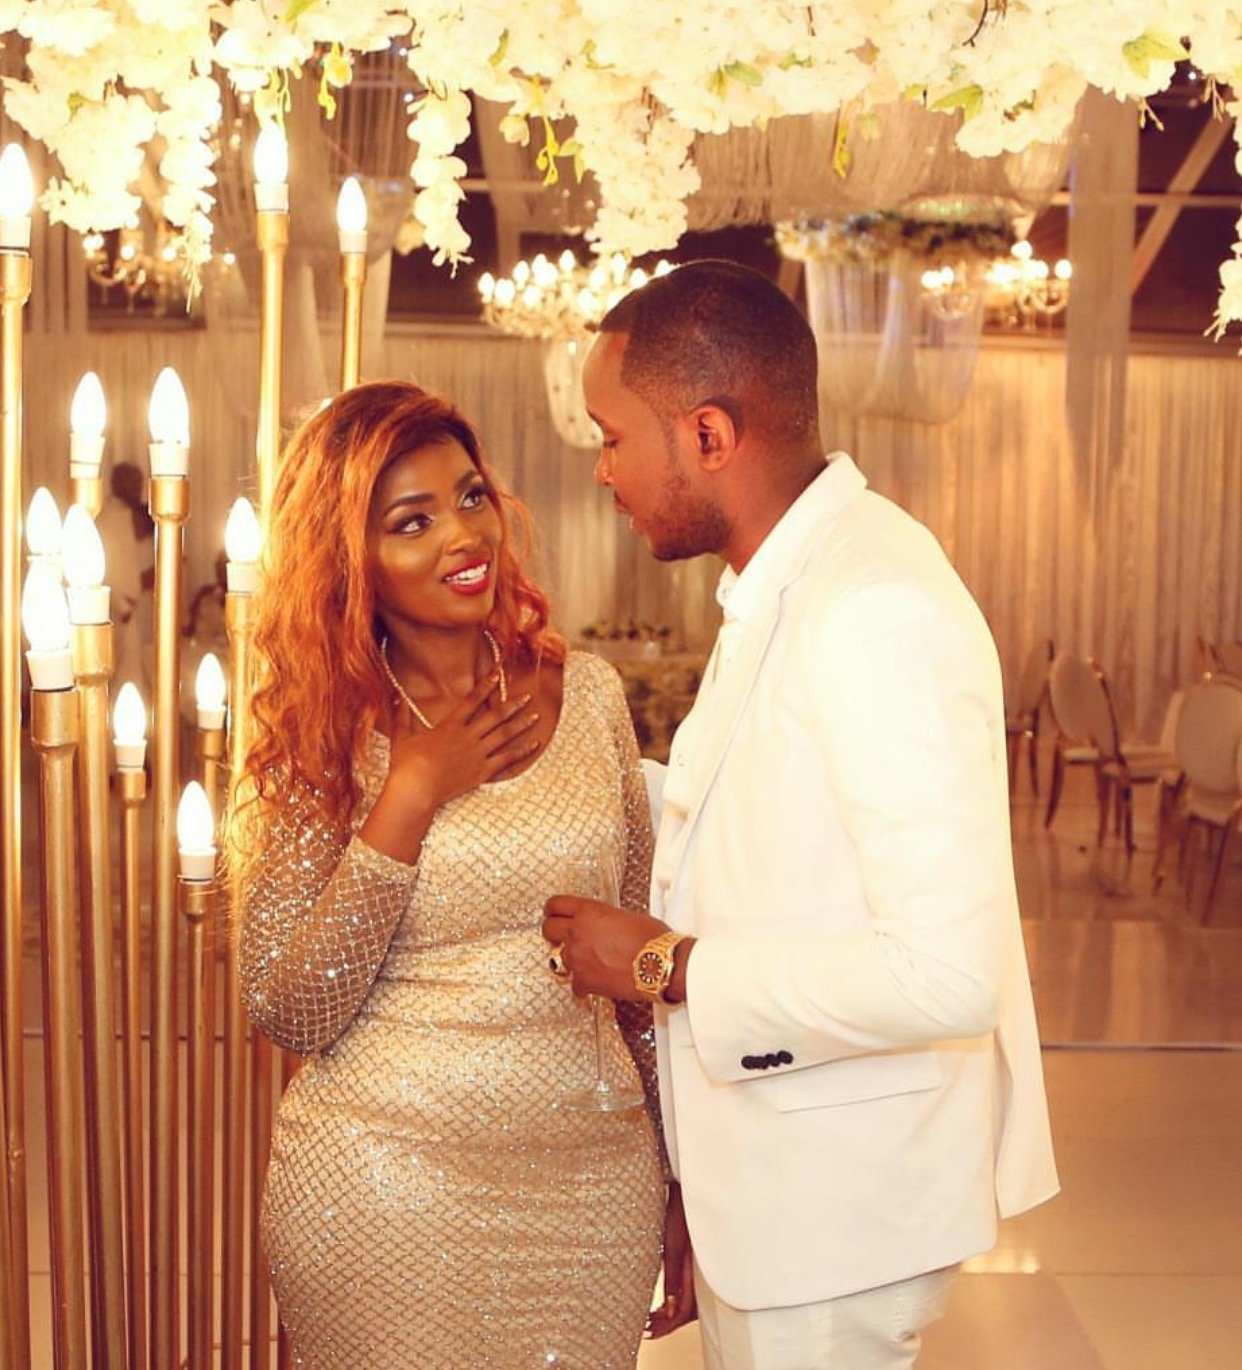 Proof that Anerlisa Muigai bagged herself the most handsome man ever!